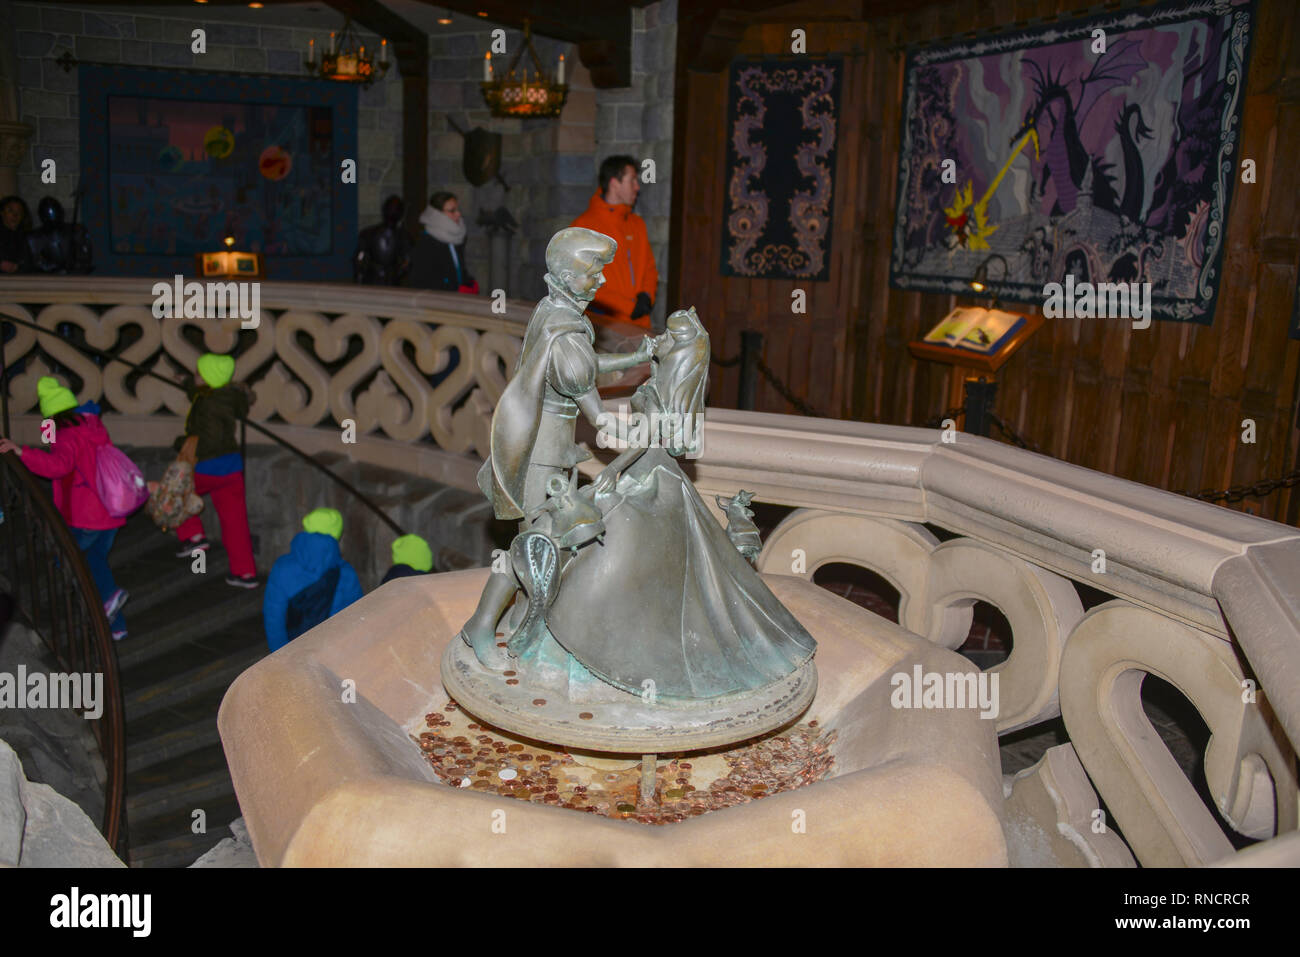 FRANCE, PARIS - February 28, 2016 - Once upon a time ... Statue of Princess Aurora and Prince Philip made in bronze, inside the castle Disneyland Stock Photo